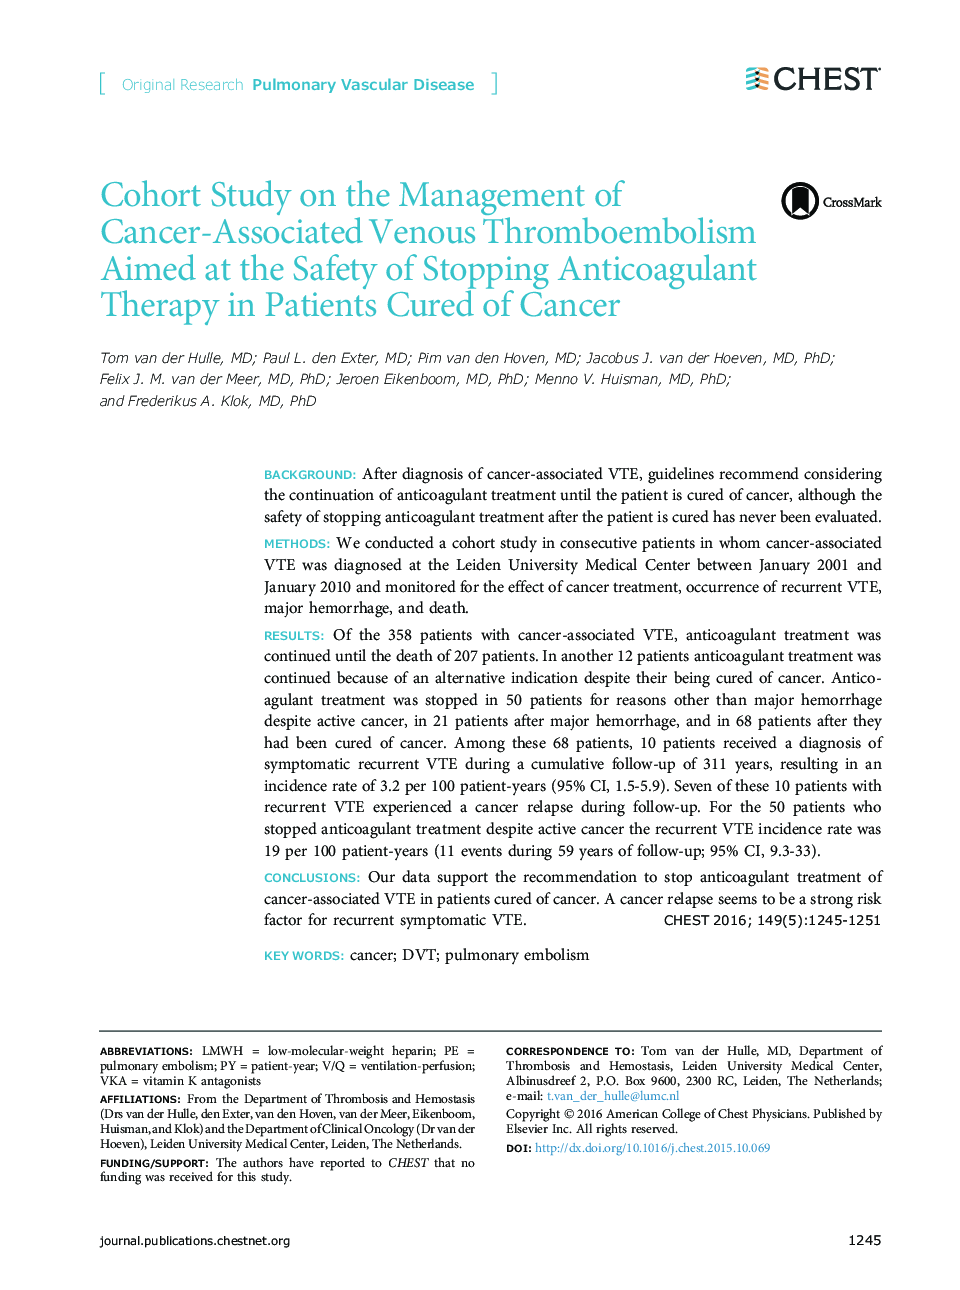 Cohort Study on the Management of Cancer-Associated Venous Thromboembolism Aimed at the Safety of Stopping Anticoagulant Therapy in Patients Cured of Cancer 